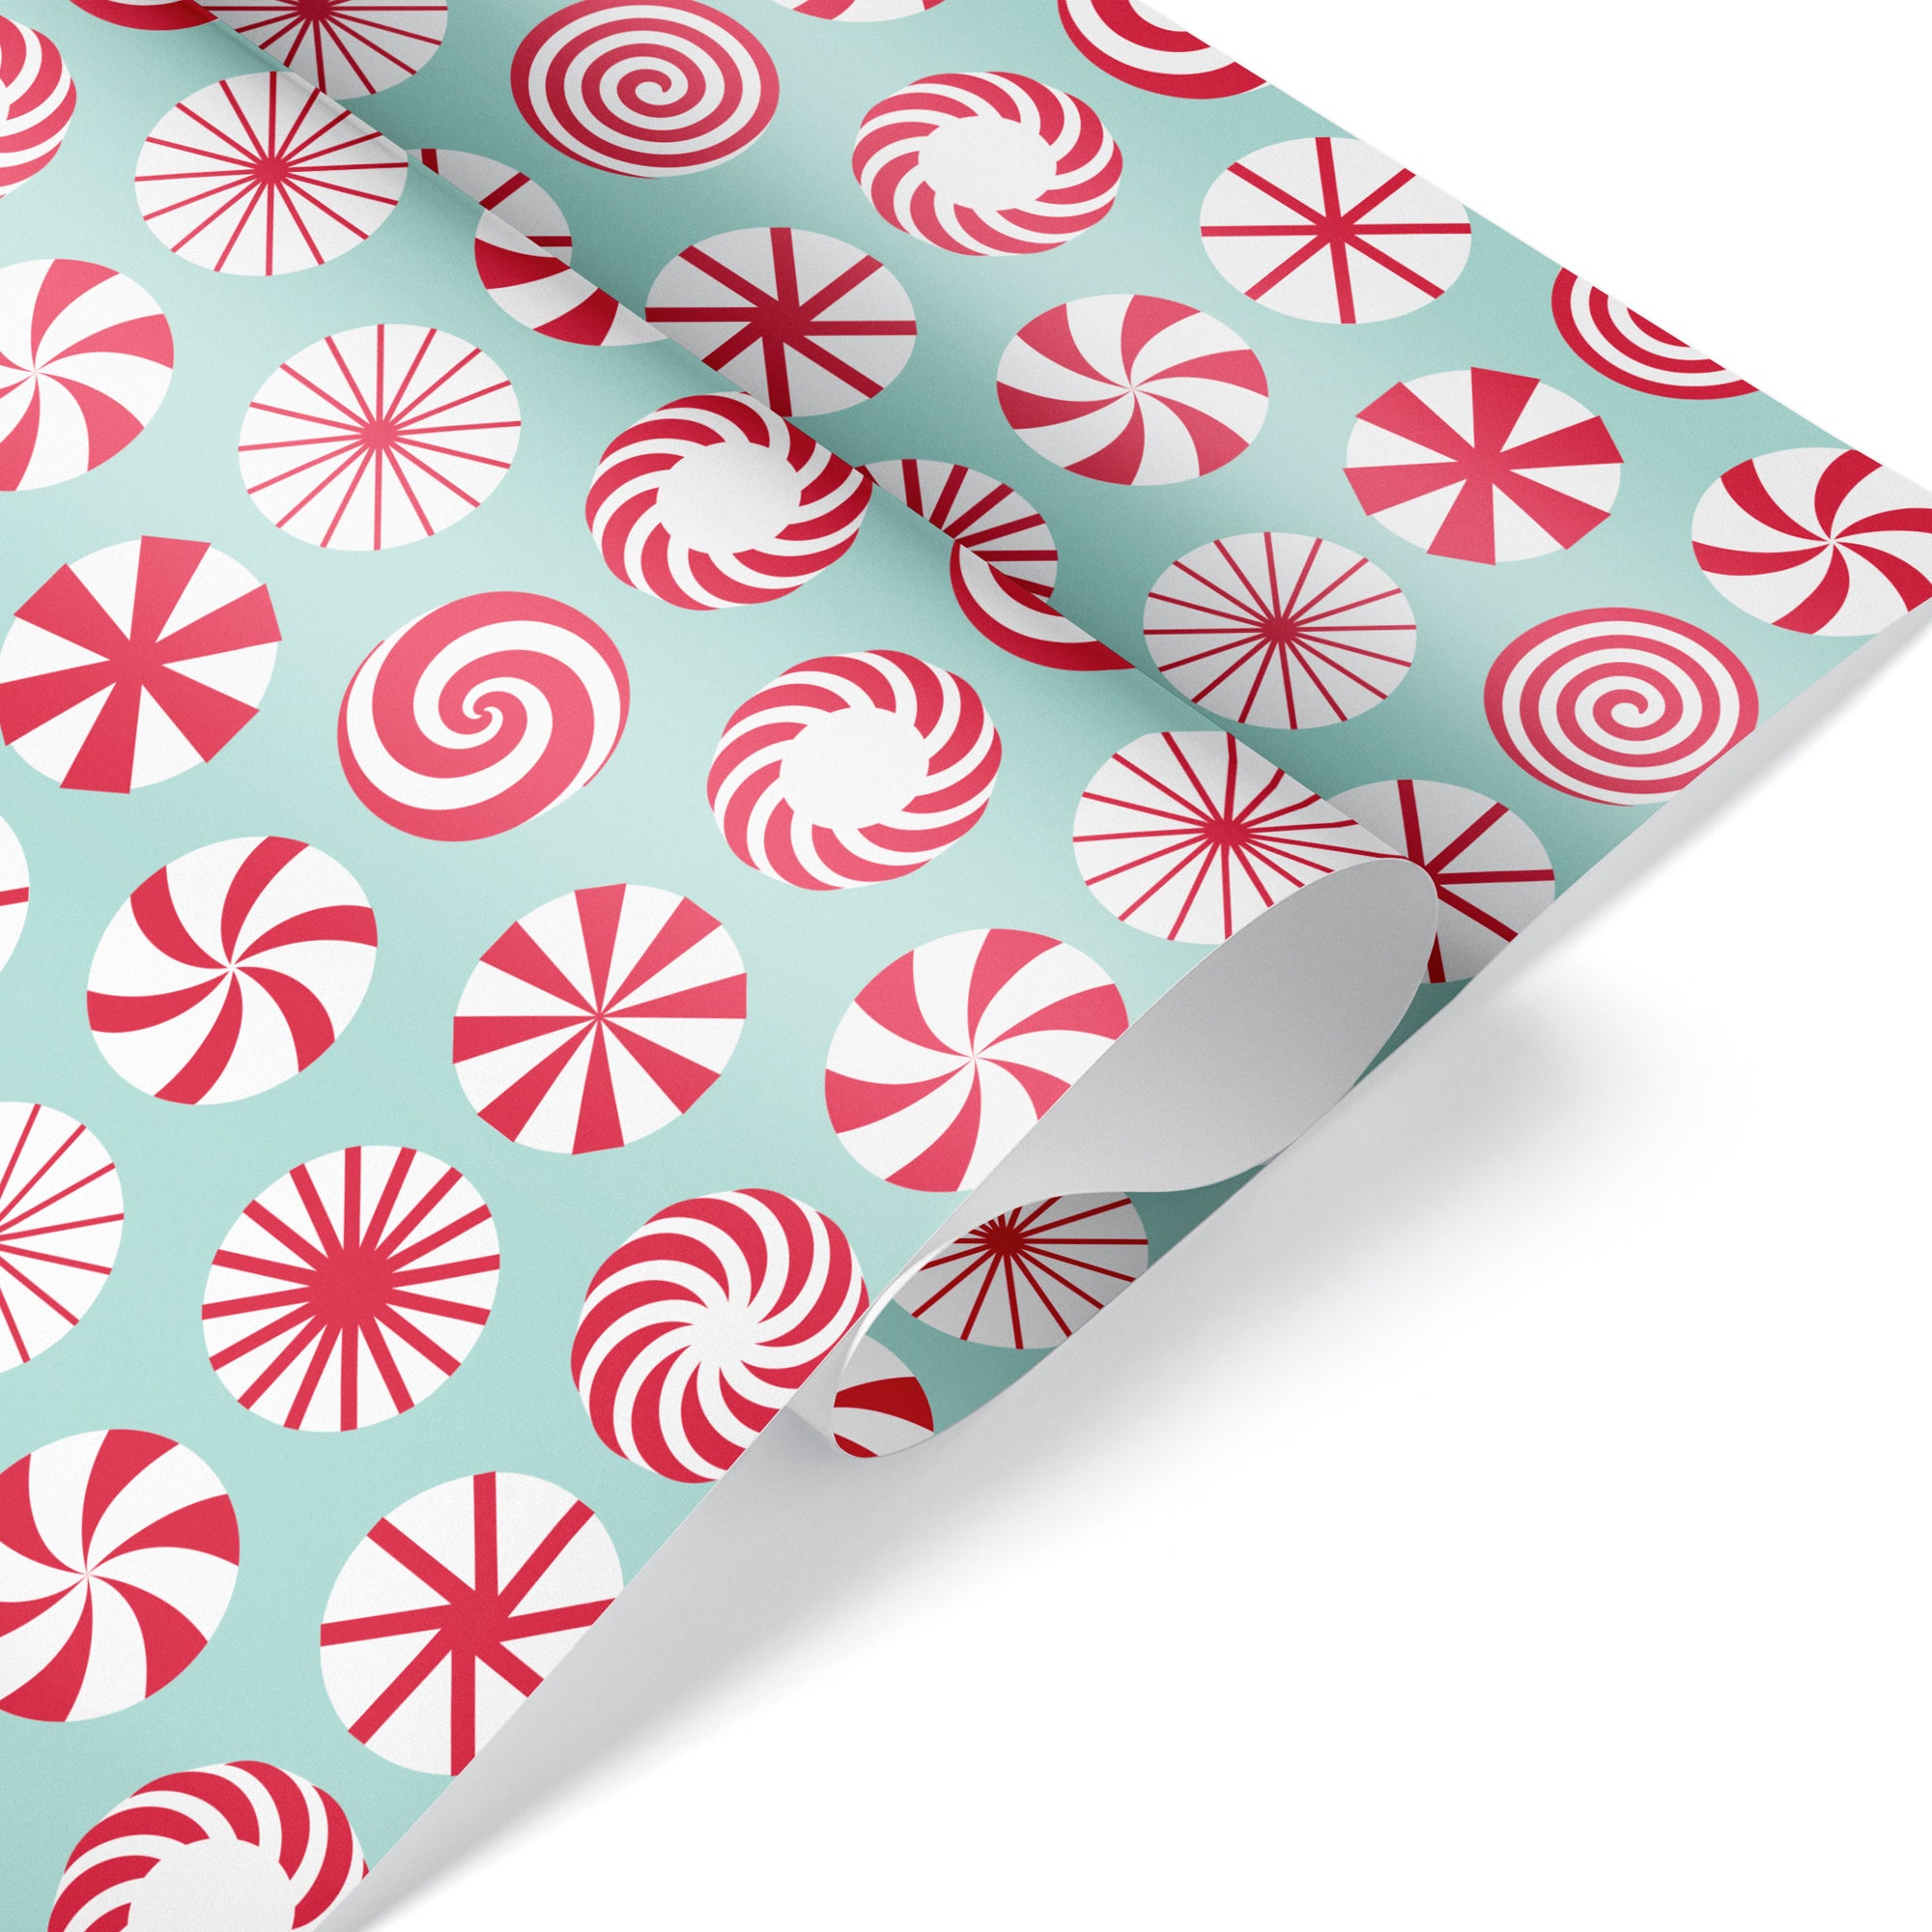 Peppermint Candy Christmas Wrapping Paper Classic Retro Holiday